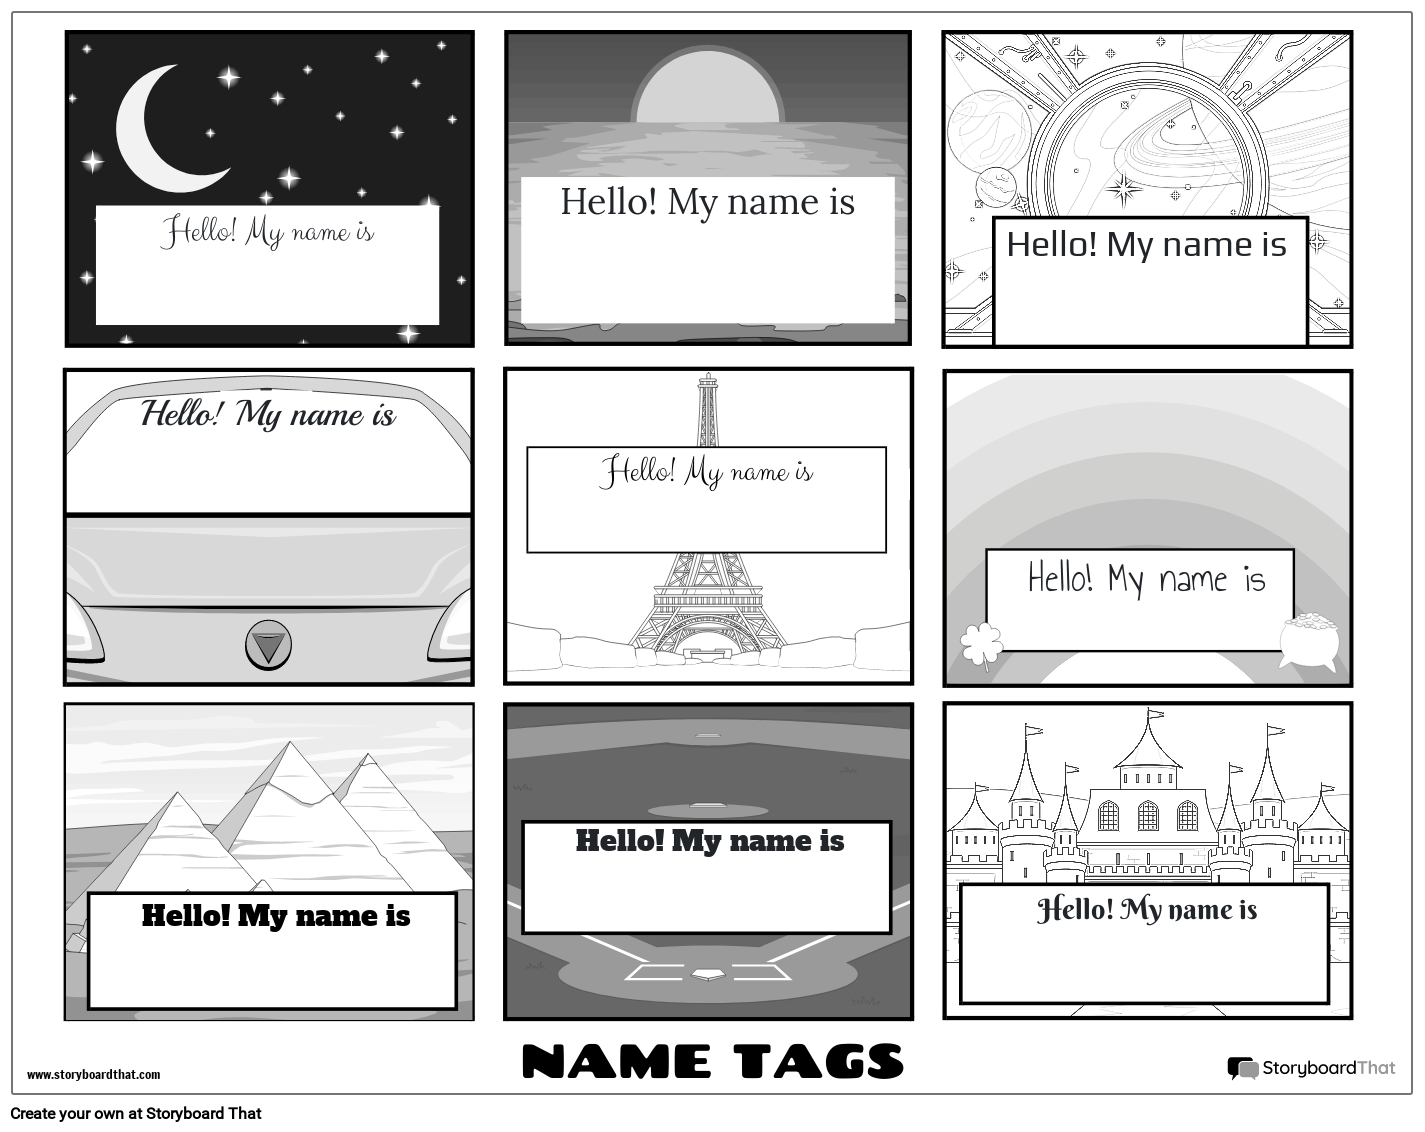 new-create-page-name-tag-template-2-black-white